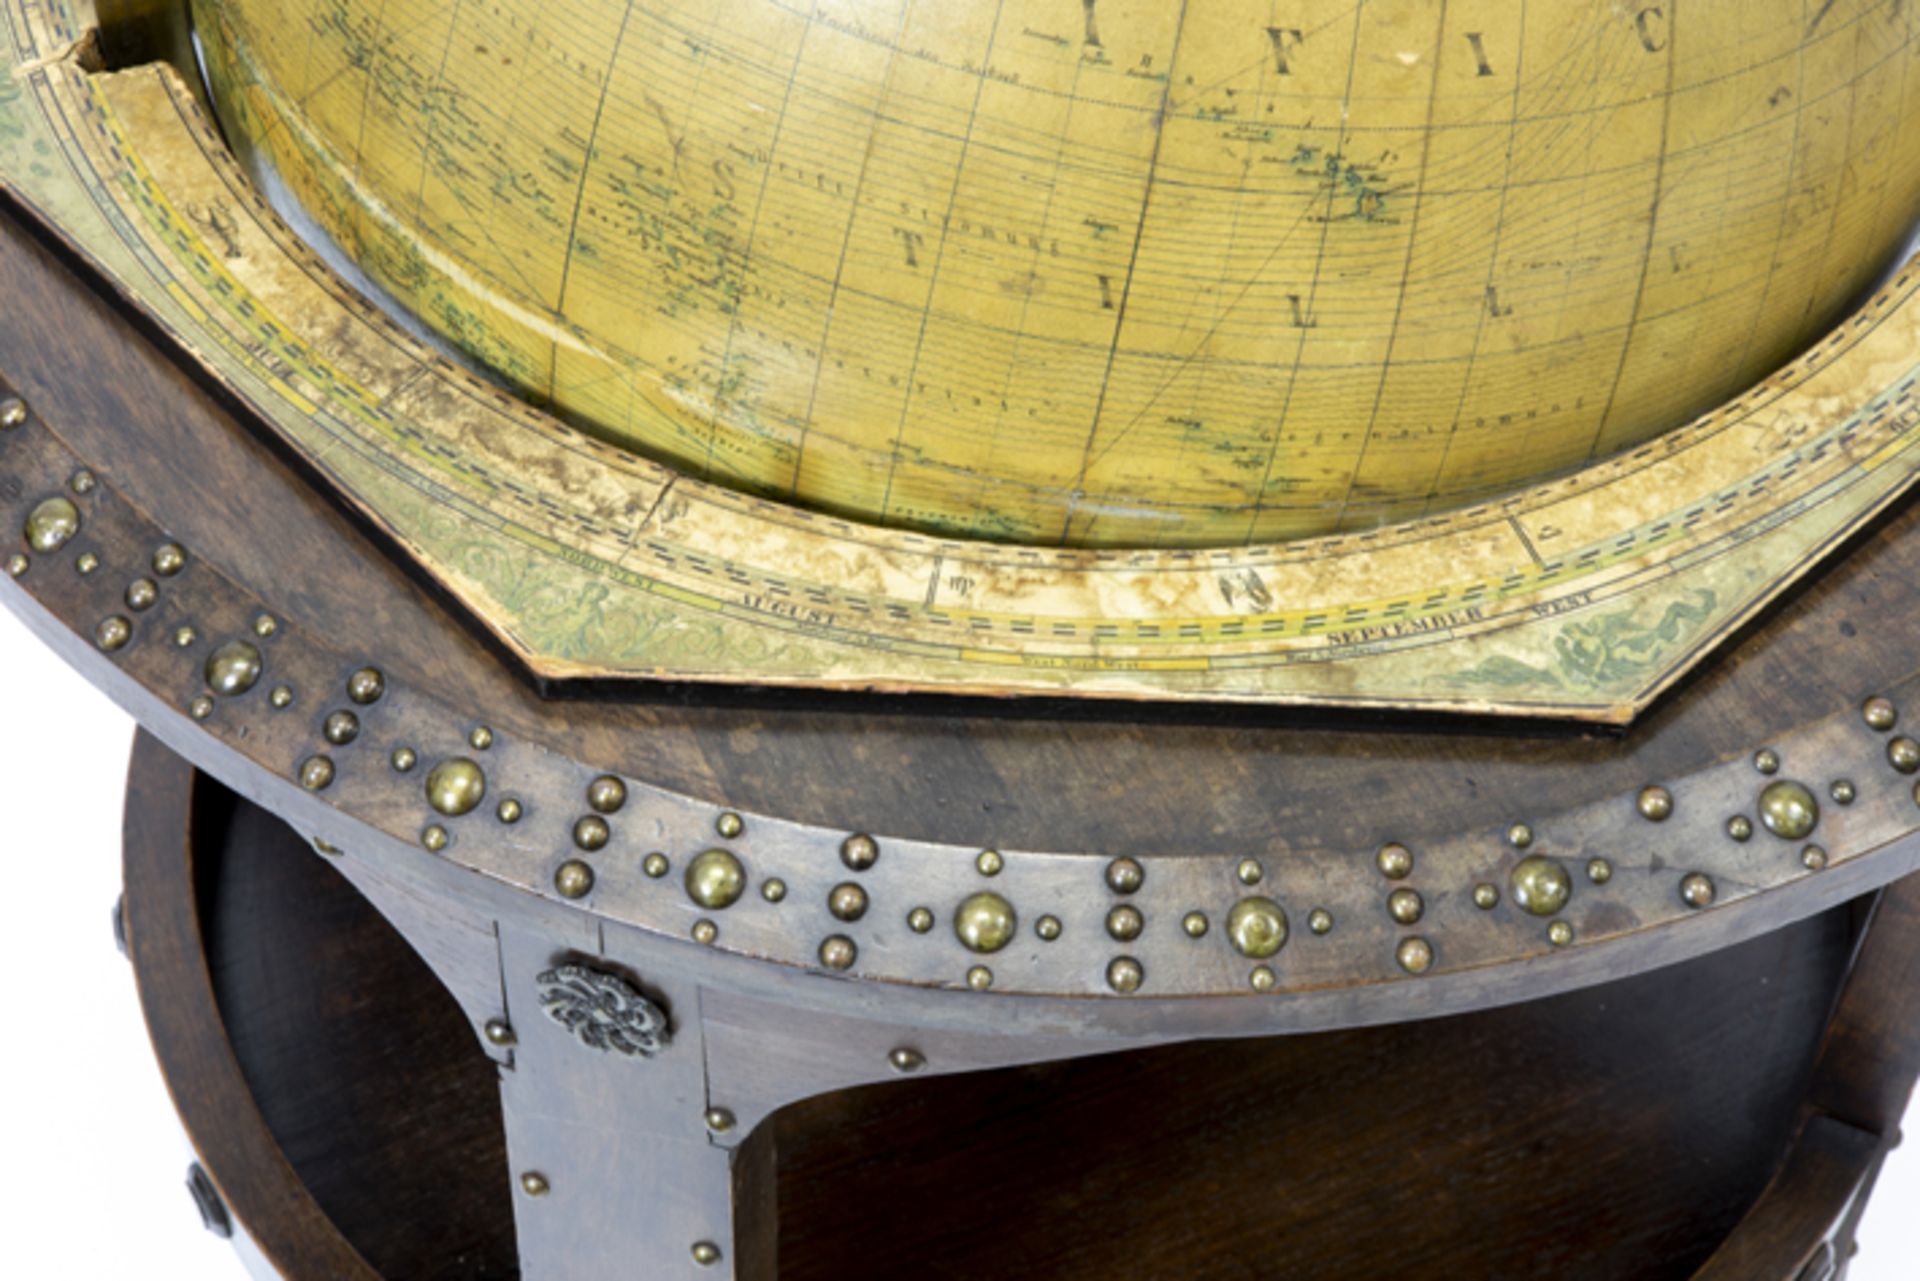 decorative marked "Columbus Erdglobus" globe with a map designed by Heinrich Kiefert - in stand - Image 5 of 6